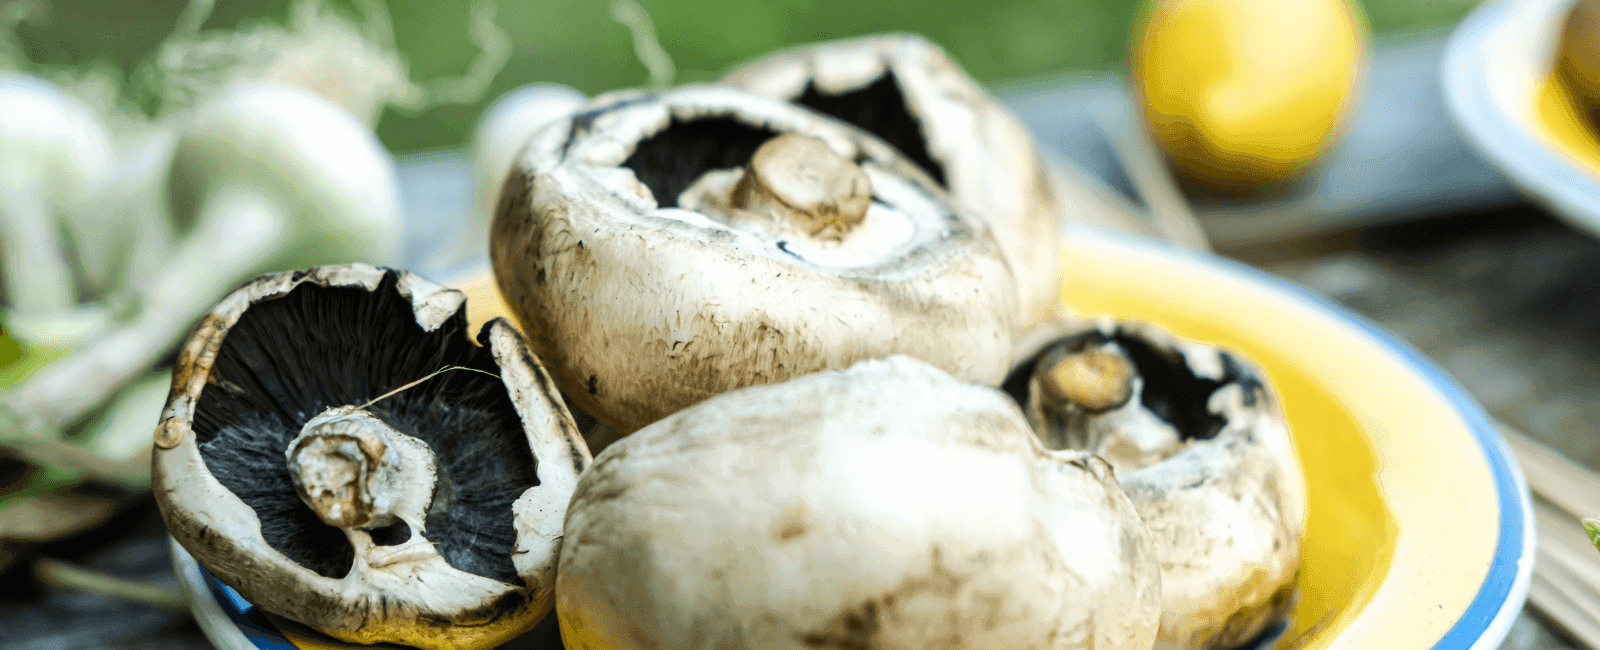 Researchers Find That Including Mushrooms in Your Diet May Reduce High Blood Pressure